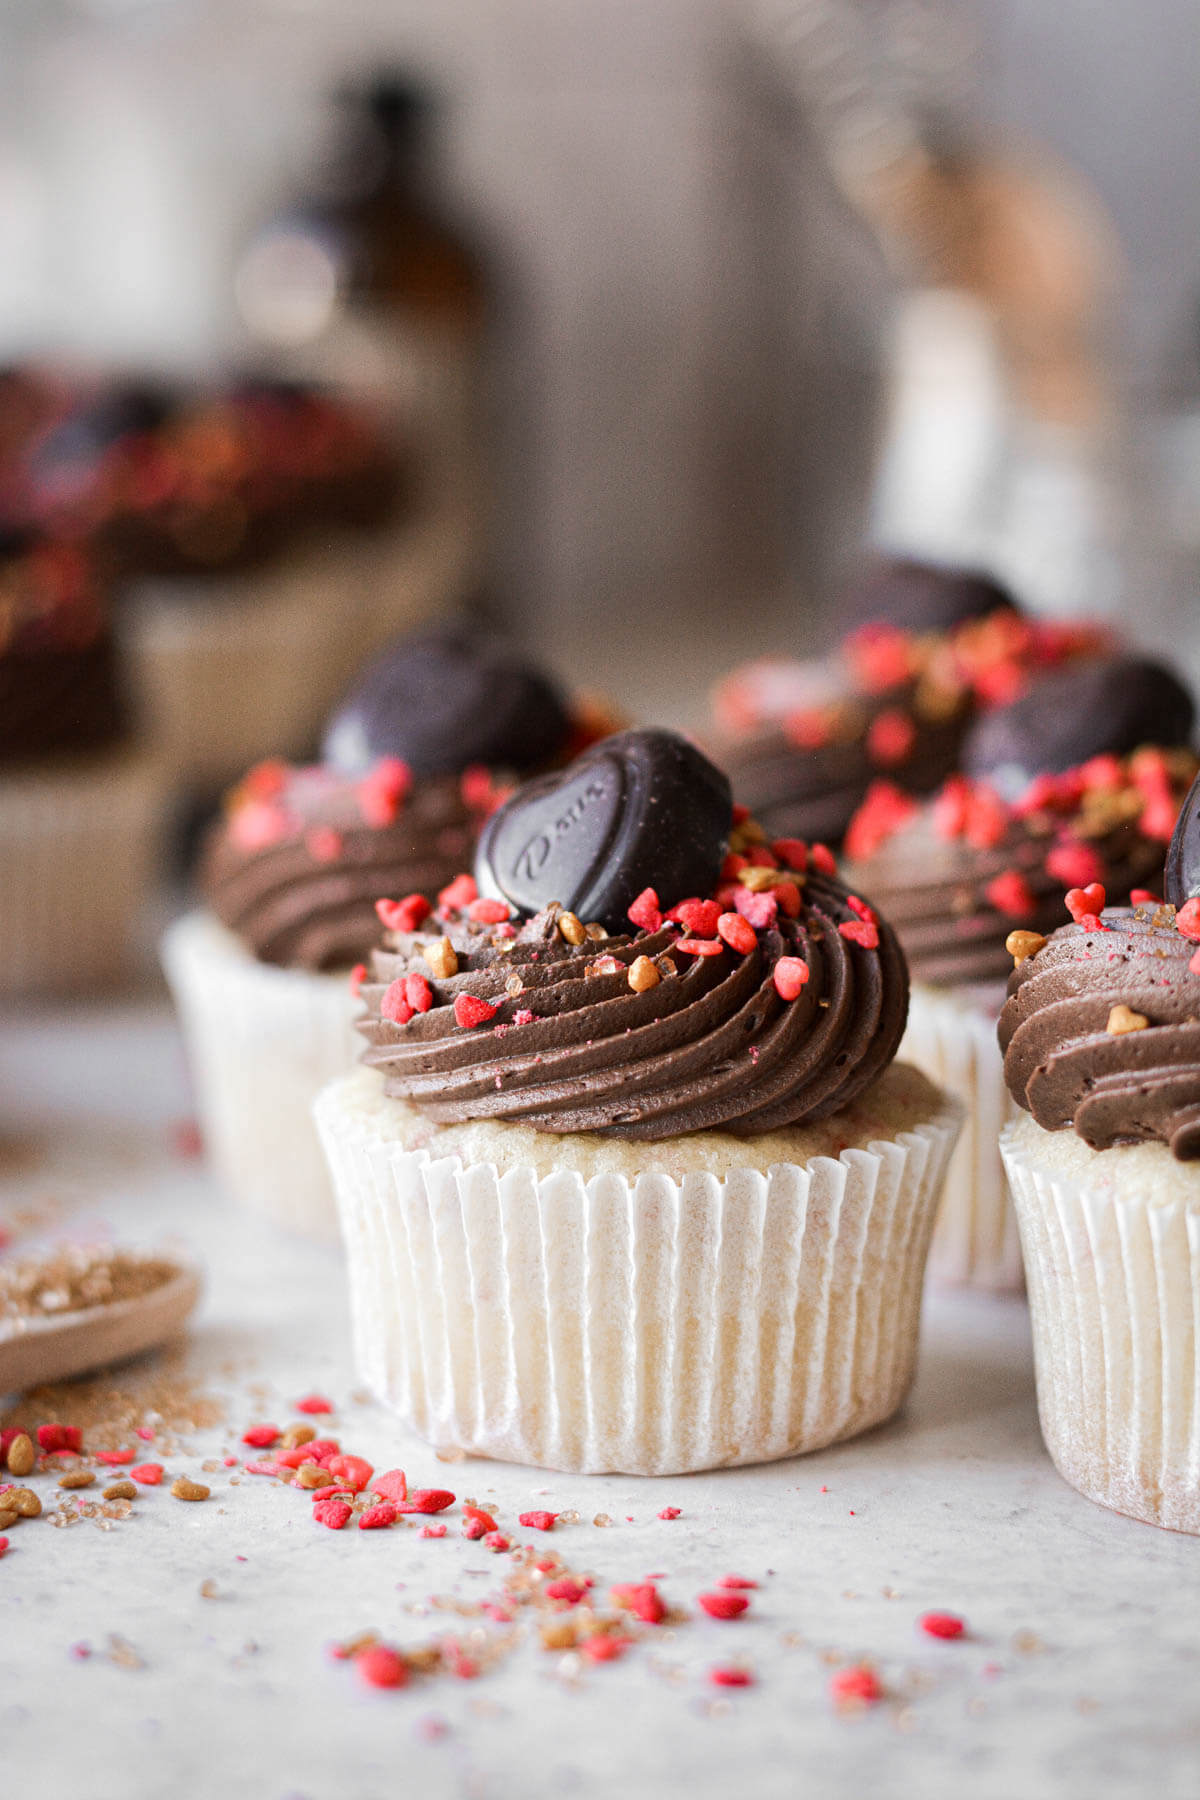 Strawberry chocolate cupcakes with chocolate hearts and red sprinkles.